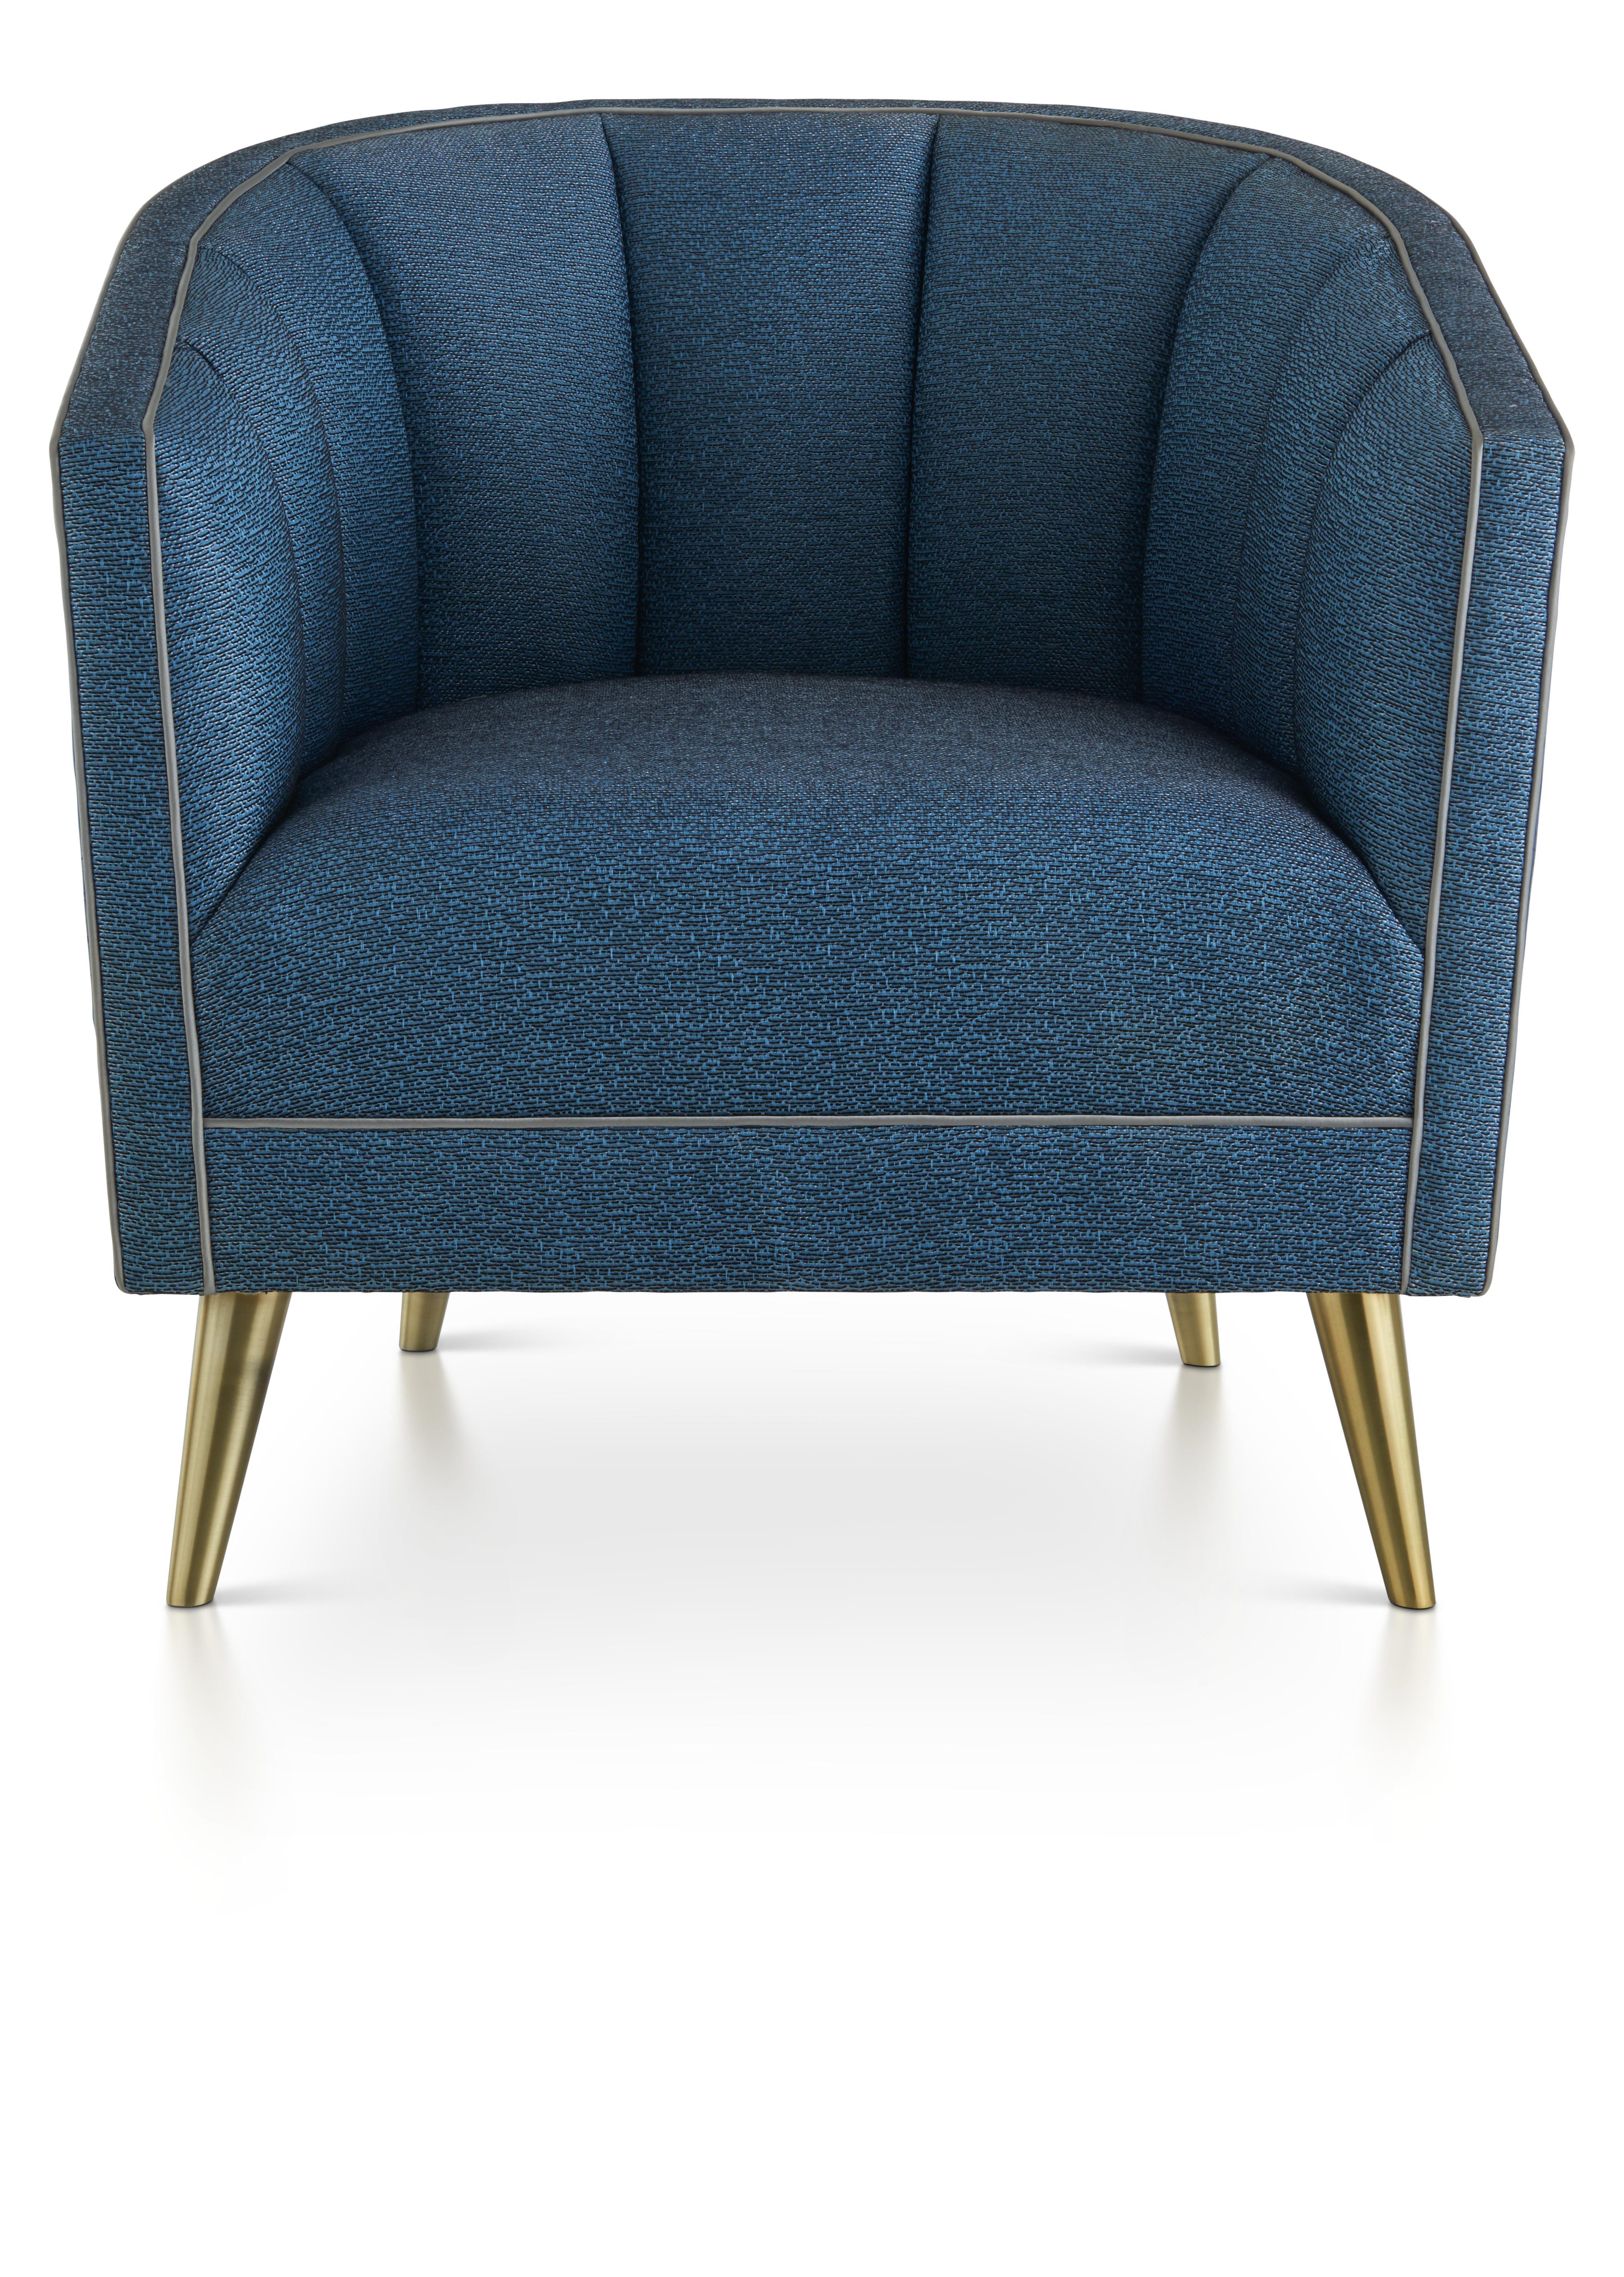 This elegant deep-seated armchair with scalloped back detail adds unique refinement to any room. 

The design can be upholstered in complementary fabrics, including a deep blue, with contrasting piping and finished with glistening fine brushed brass